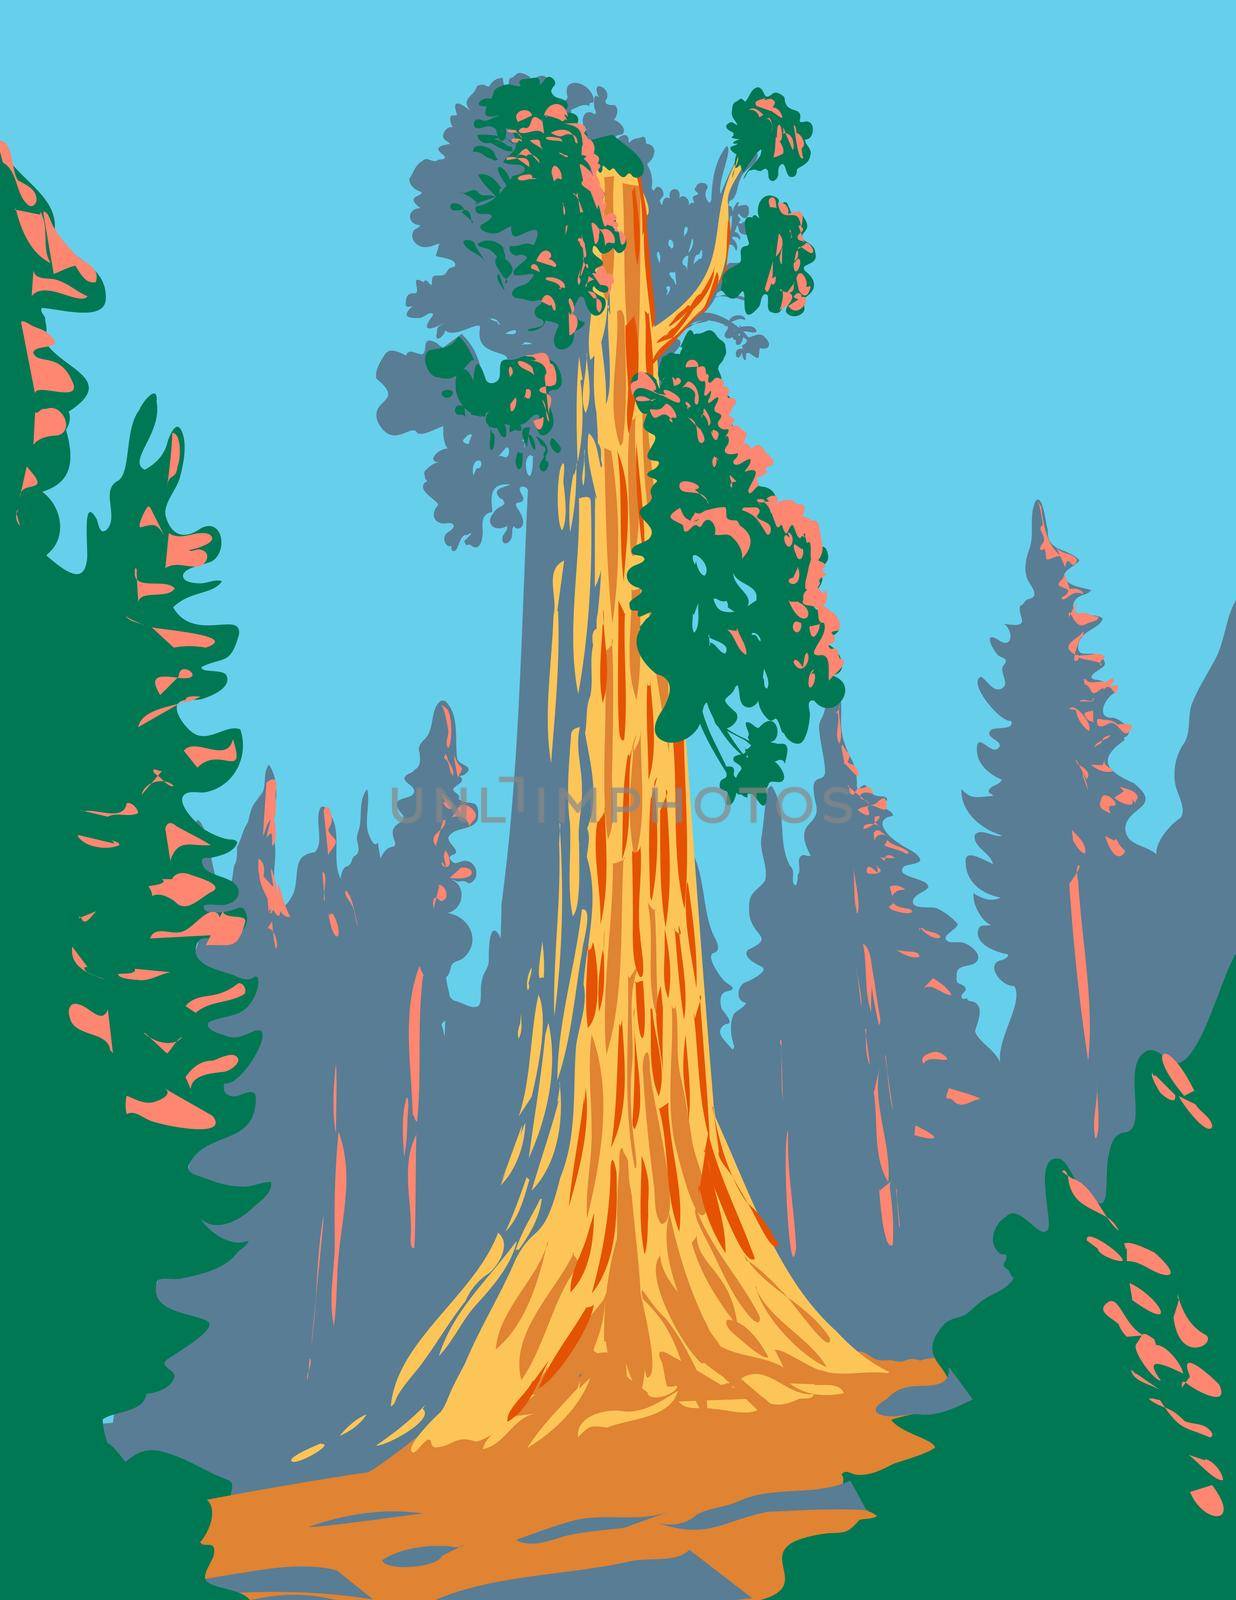 The General Grant Tree a Giant Sequoia in the General Grant Grove Section of Kings Canyon National Park in California WPA Poster Art by patrimonio